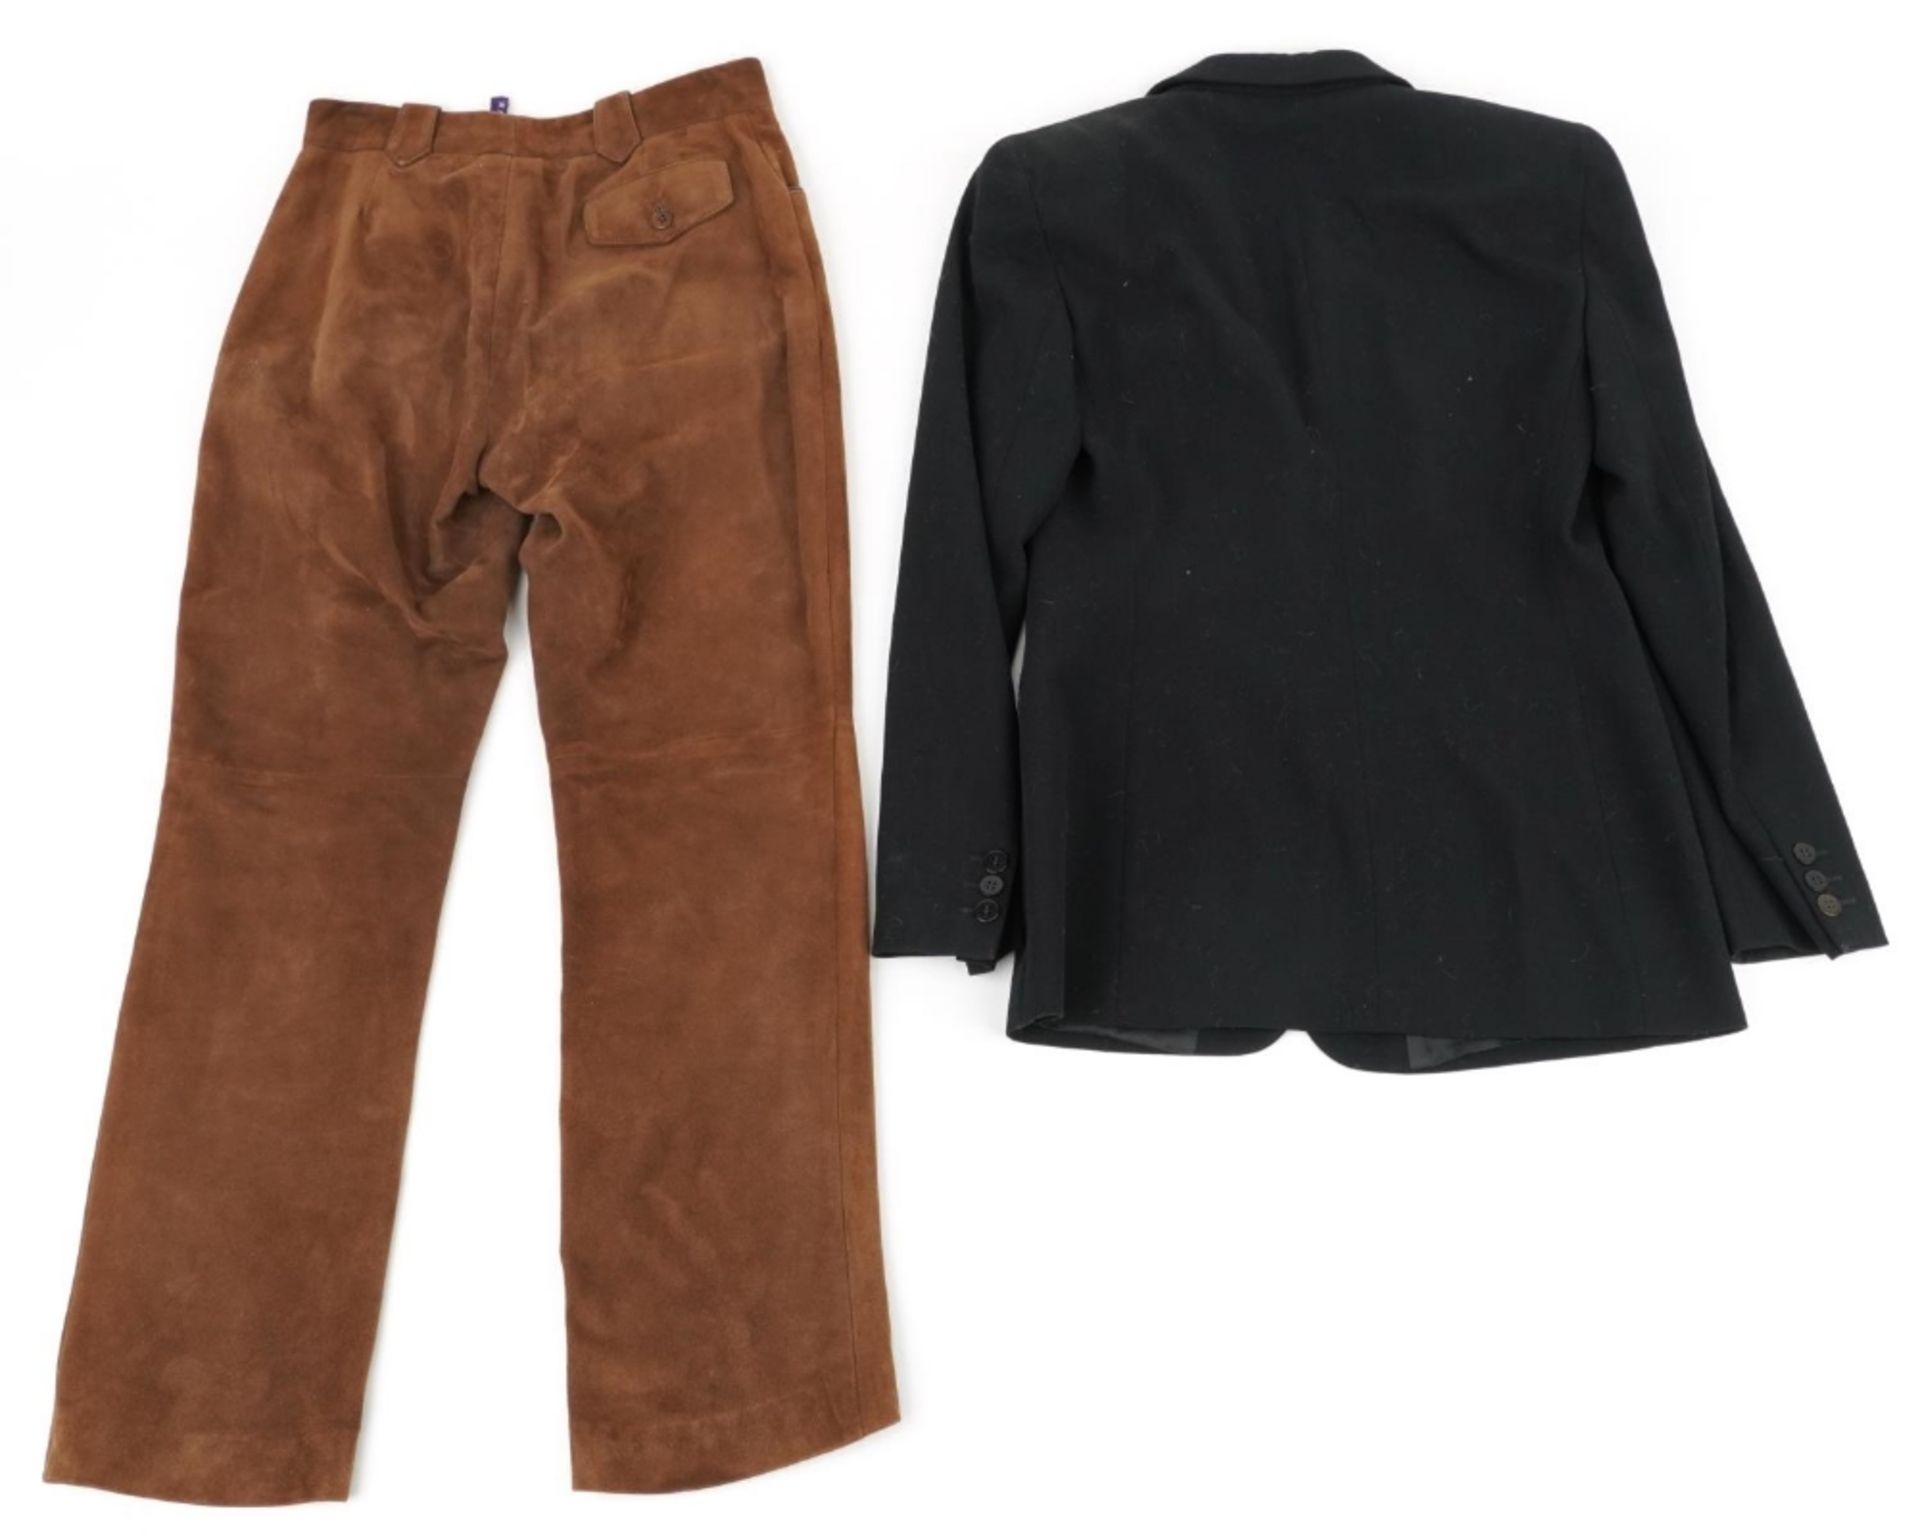 Pair of Ralph Lauren suede trousers, size 4 and Giorgio Armani blazer, size 40 : For further - Image 4 of 4